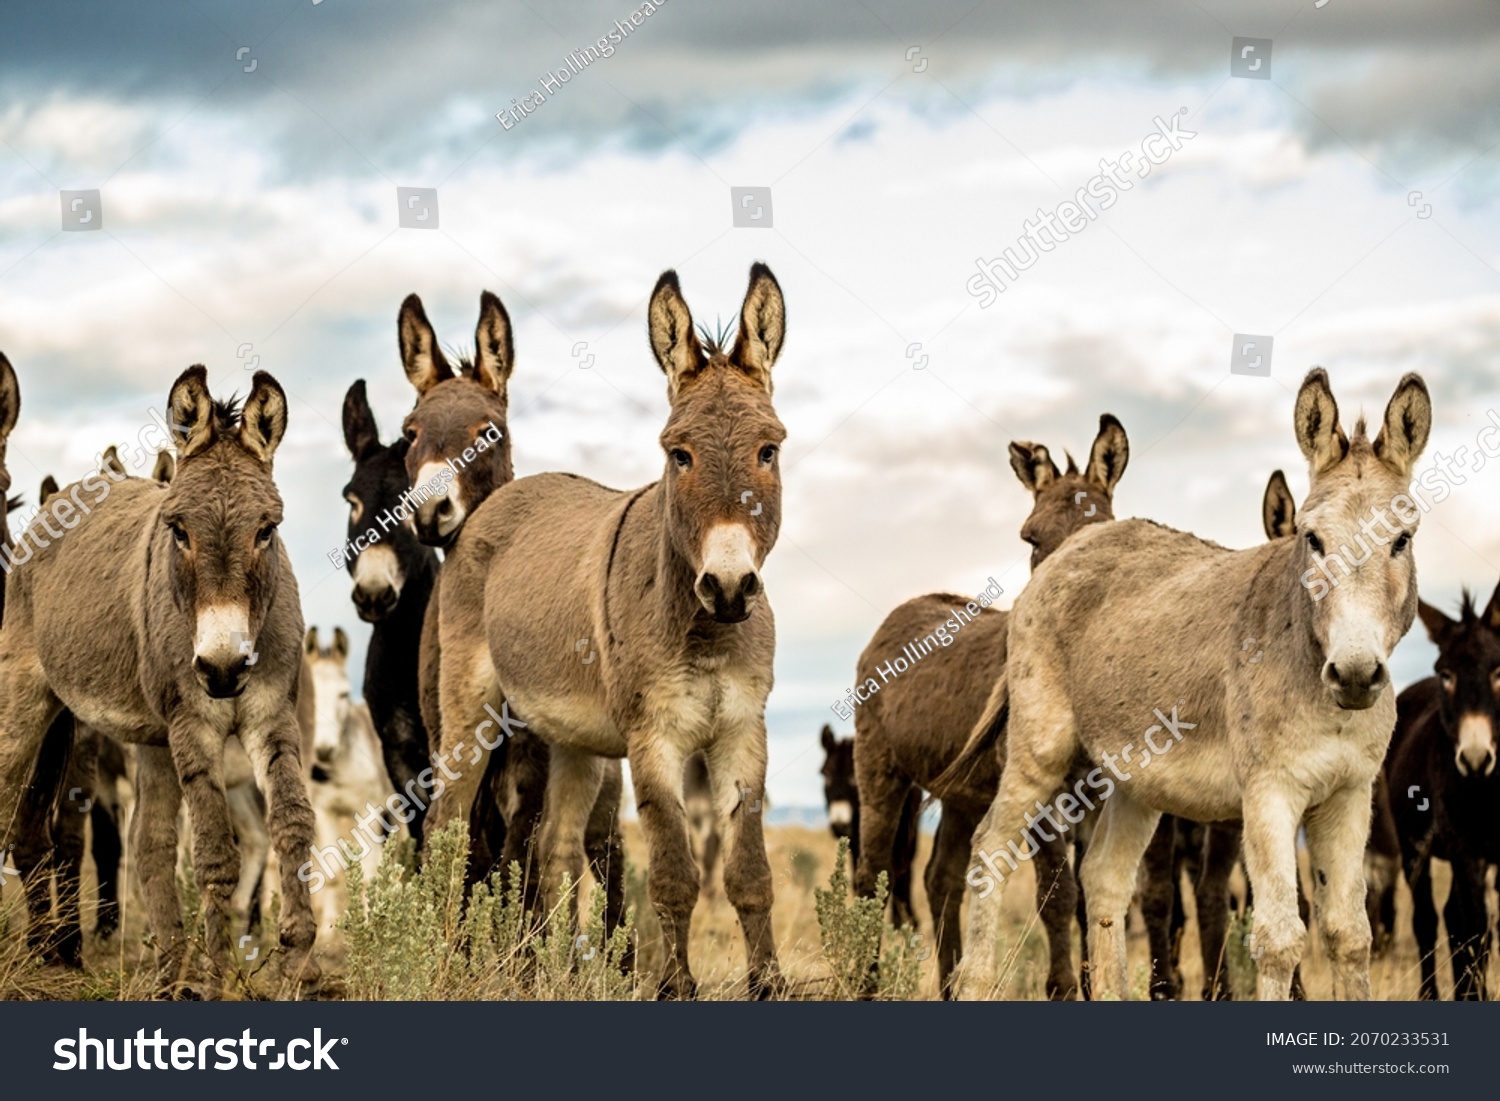 A herd of colorful Stubborn Donkeys in a countryside field. #2070233531